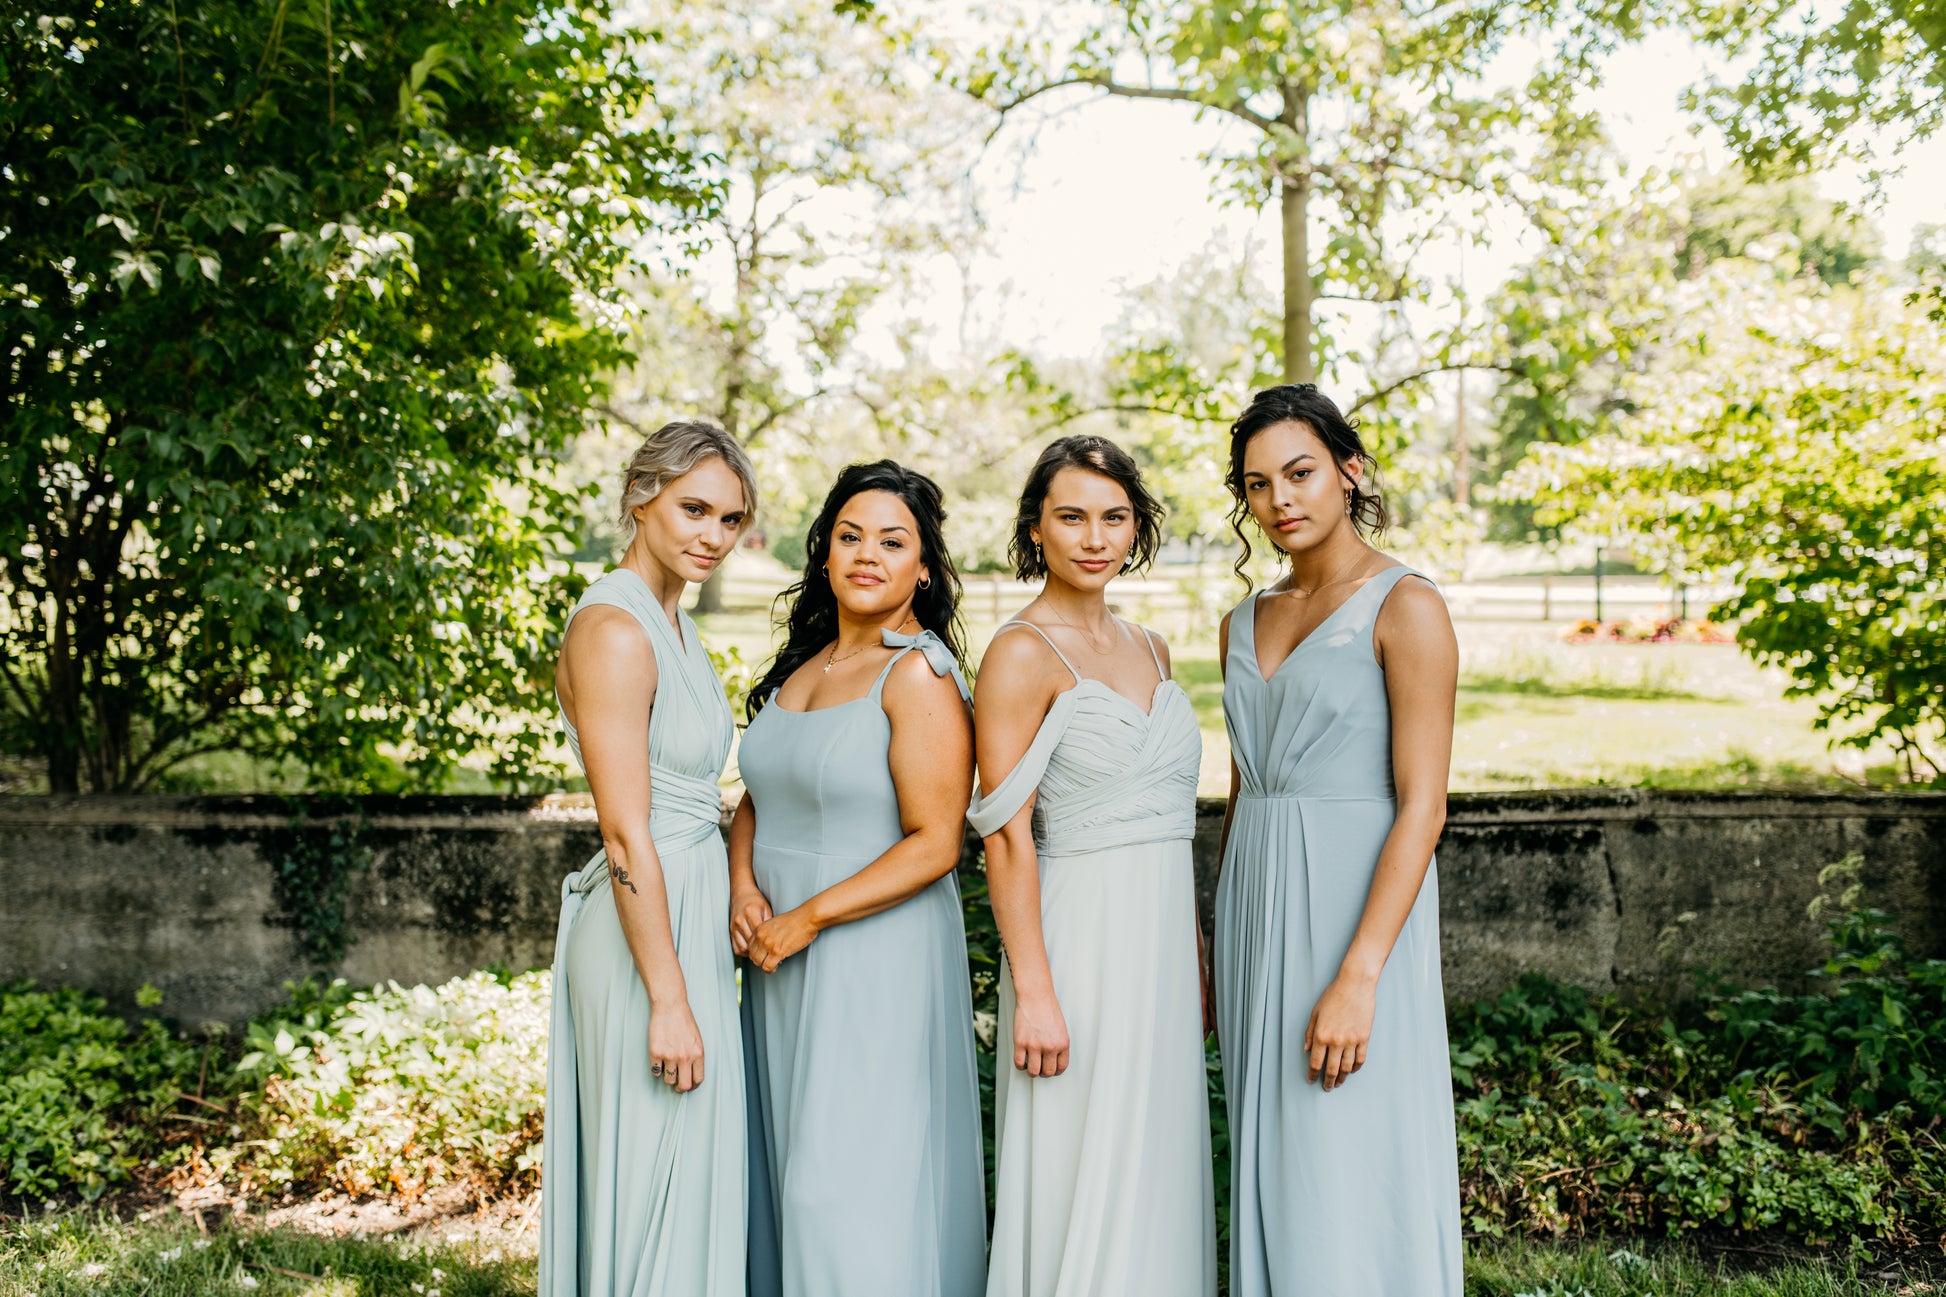 Jasmine (second from left) wears the Camilla dress